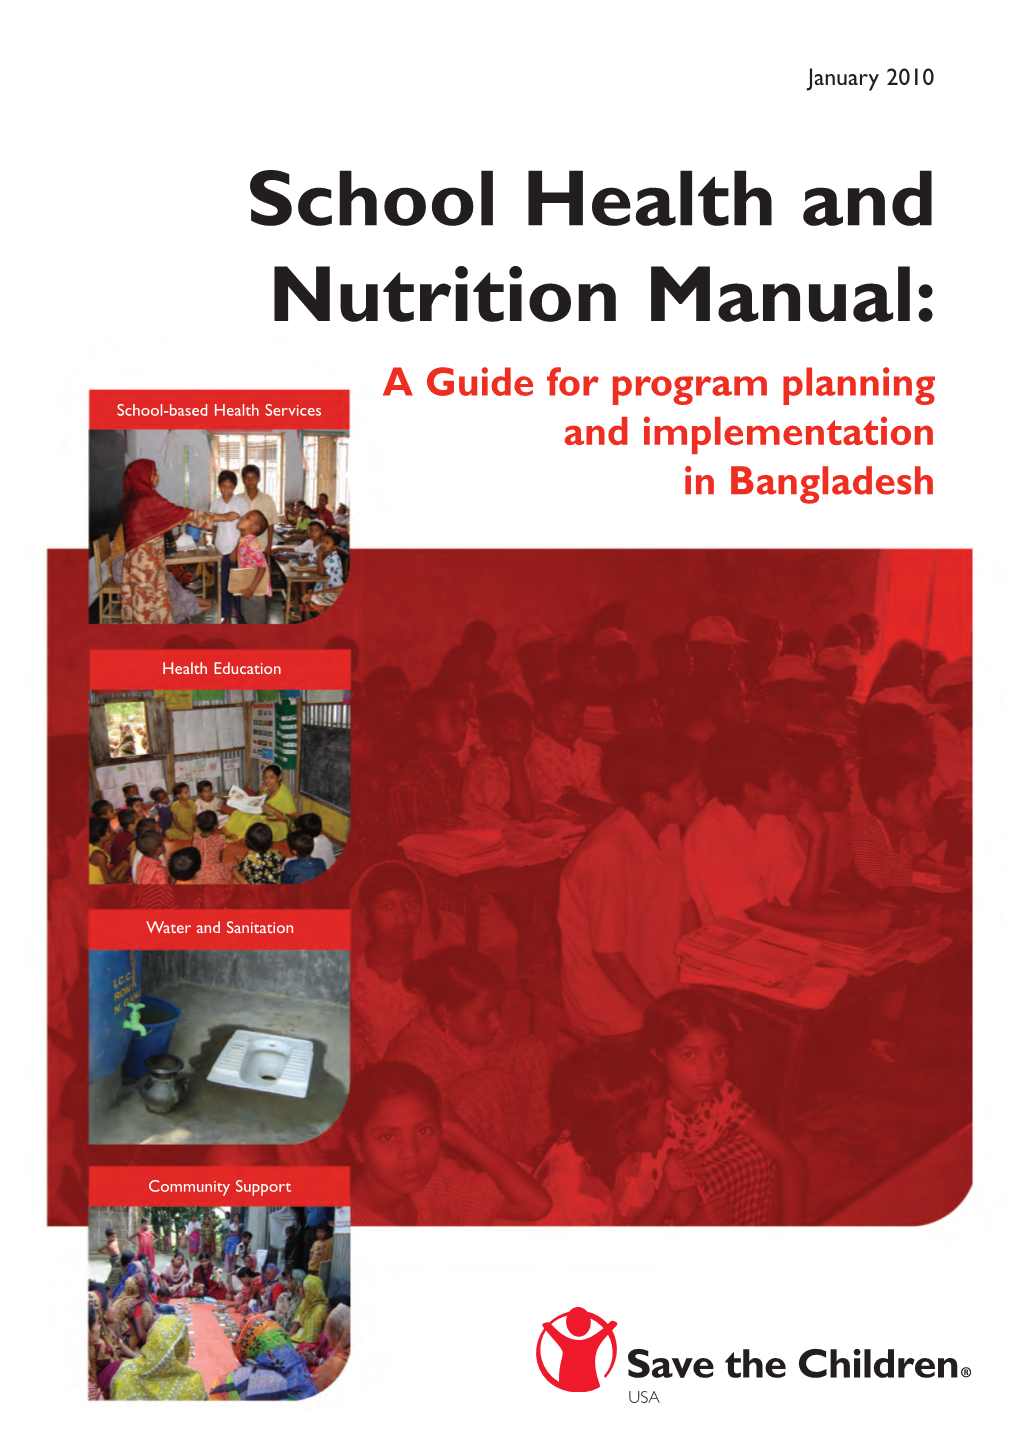 School Health and Nutrition Manual: a Guide for Program Planning School-Based Health Services and Implementation in Bangladesh